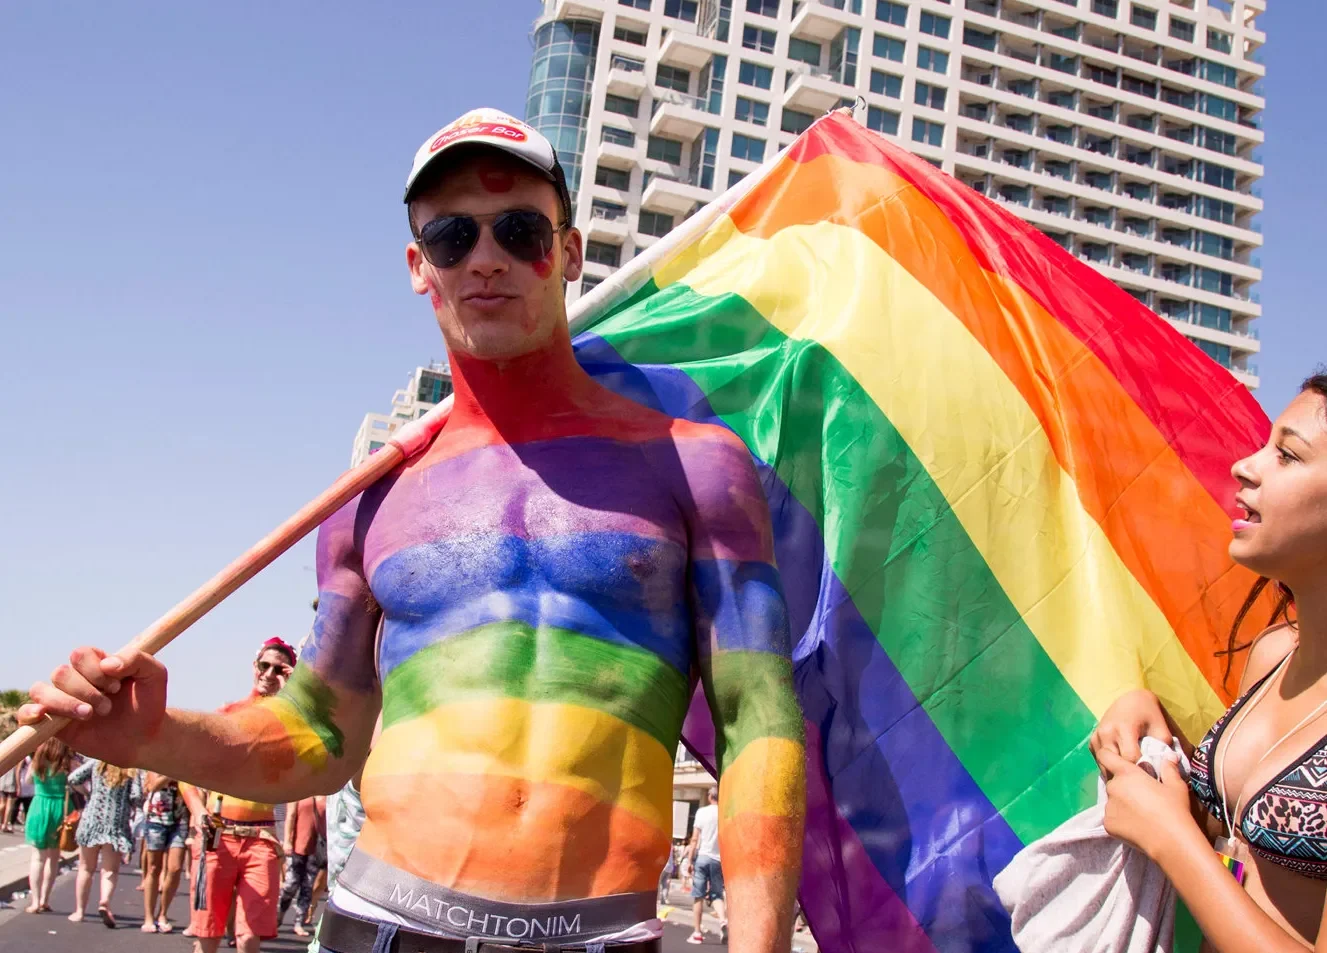 This year’s Tel Aviv Pride Parade to be replaced with rally for “pride, hope, and liberty”